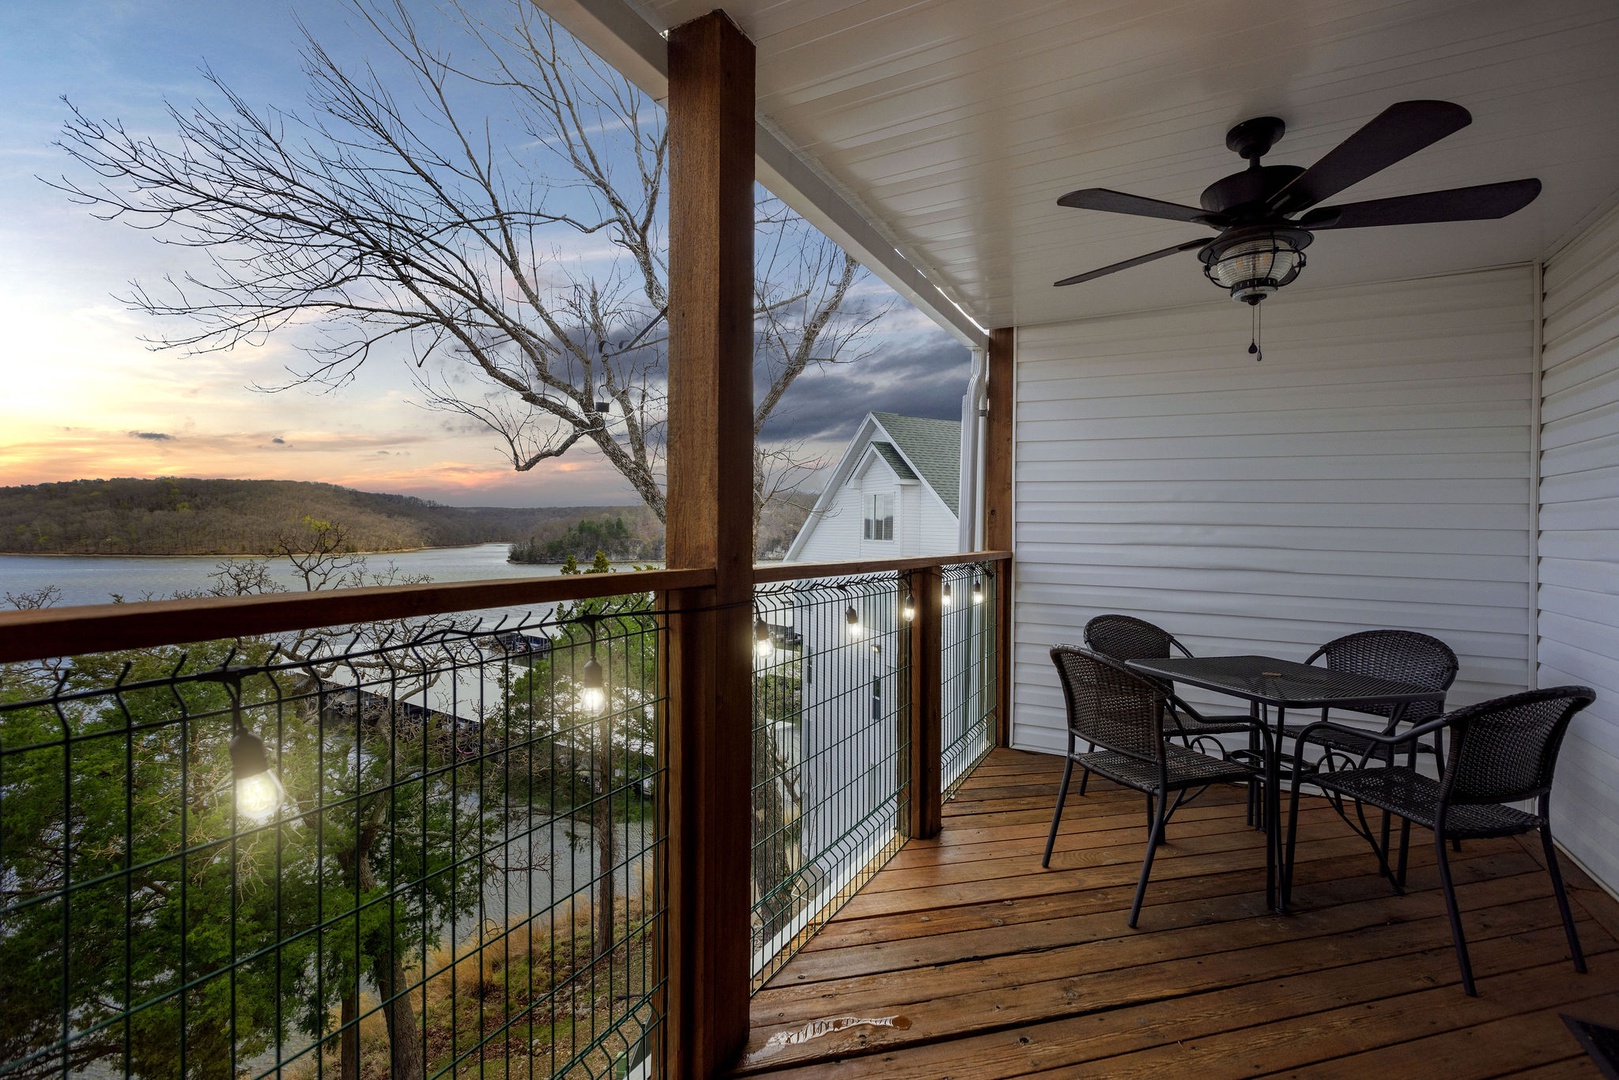 Revel in the breathtaking lake scenery from the private deck